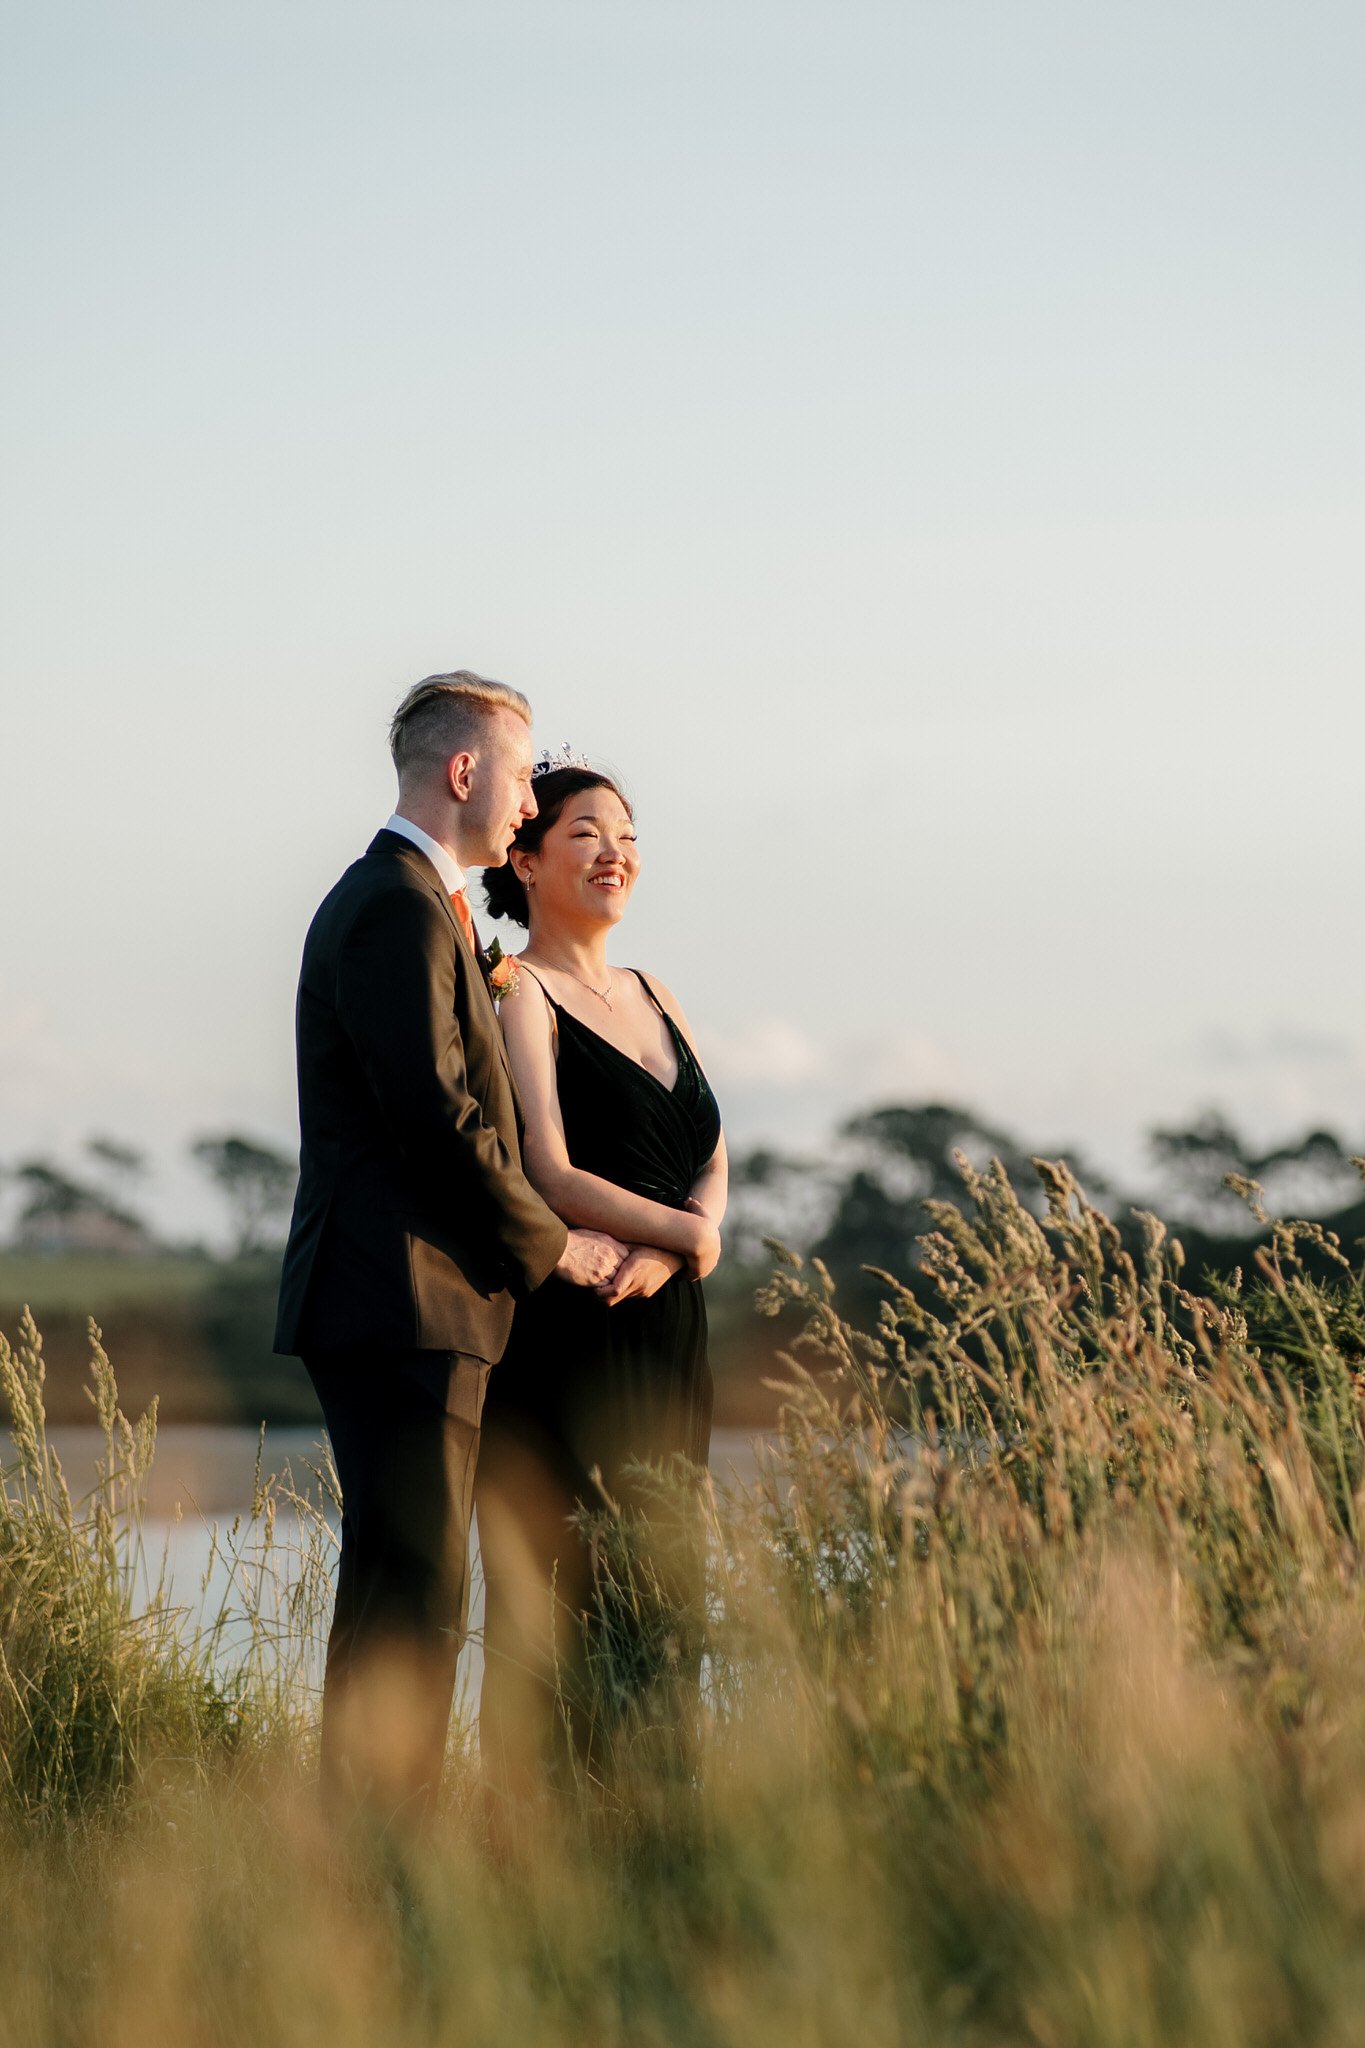 huntly-house-auckland-wedding-venue-mansion-vintage-luxury-accommodation-photographer-videography-dear-white-productions-photo-film-south-clarks-beach (117).jpg